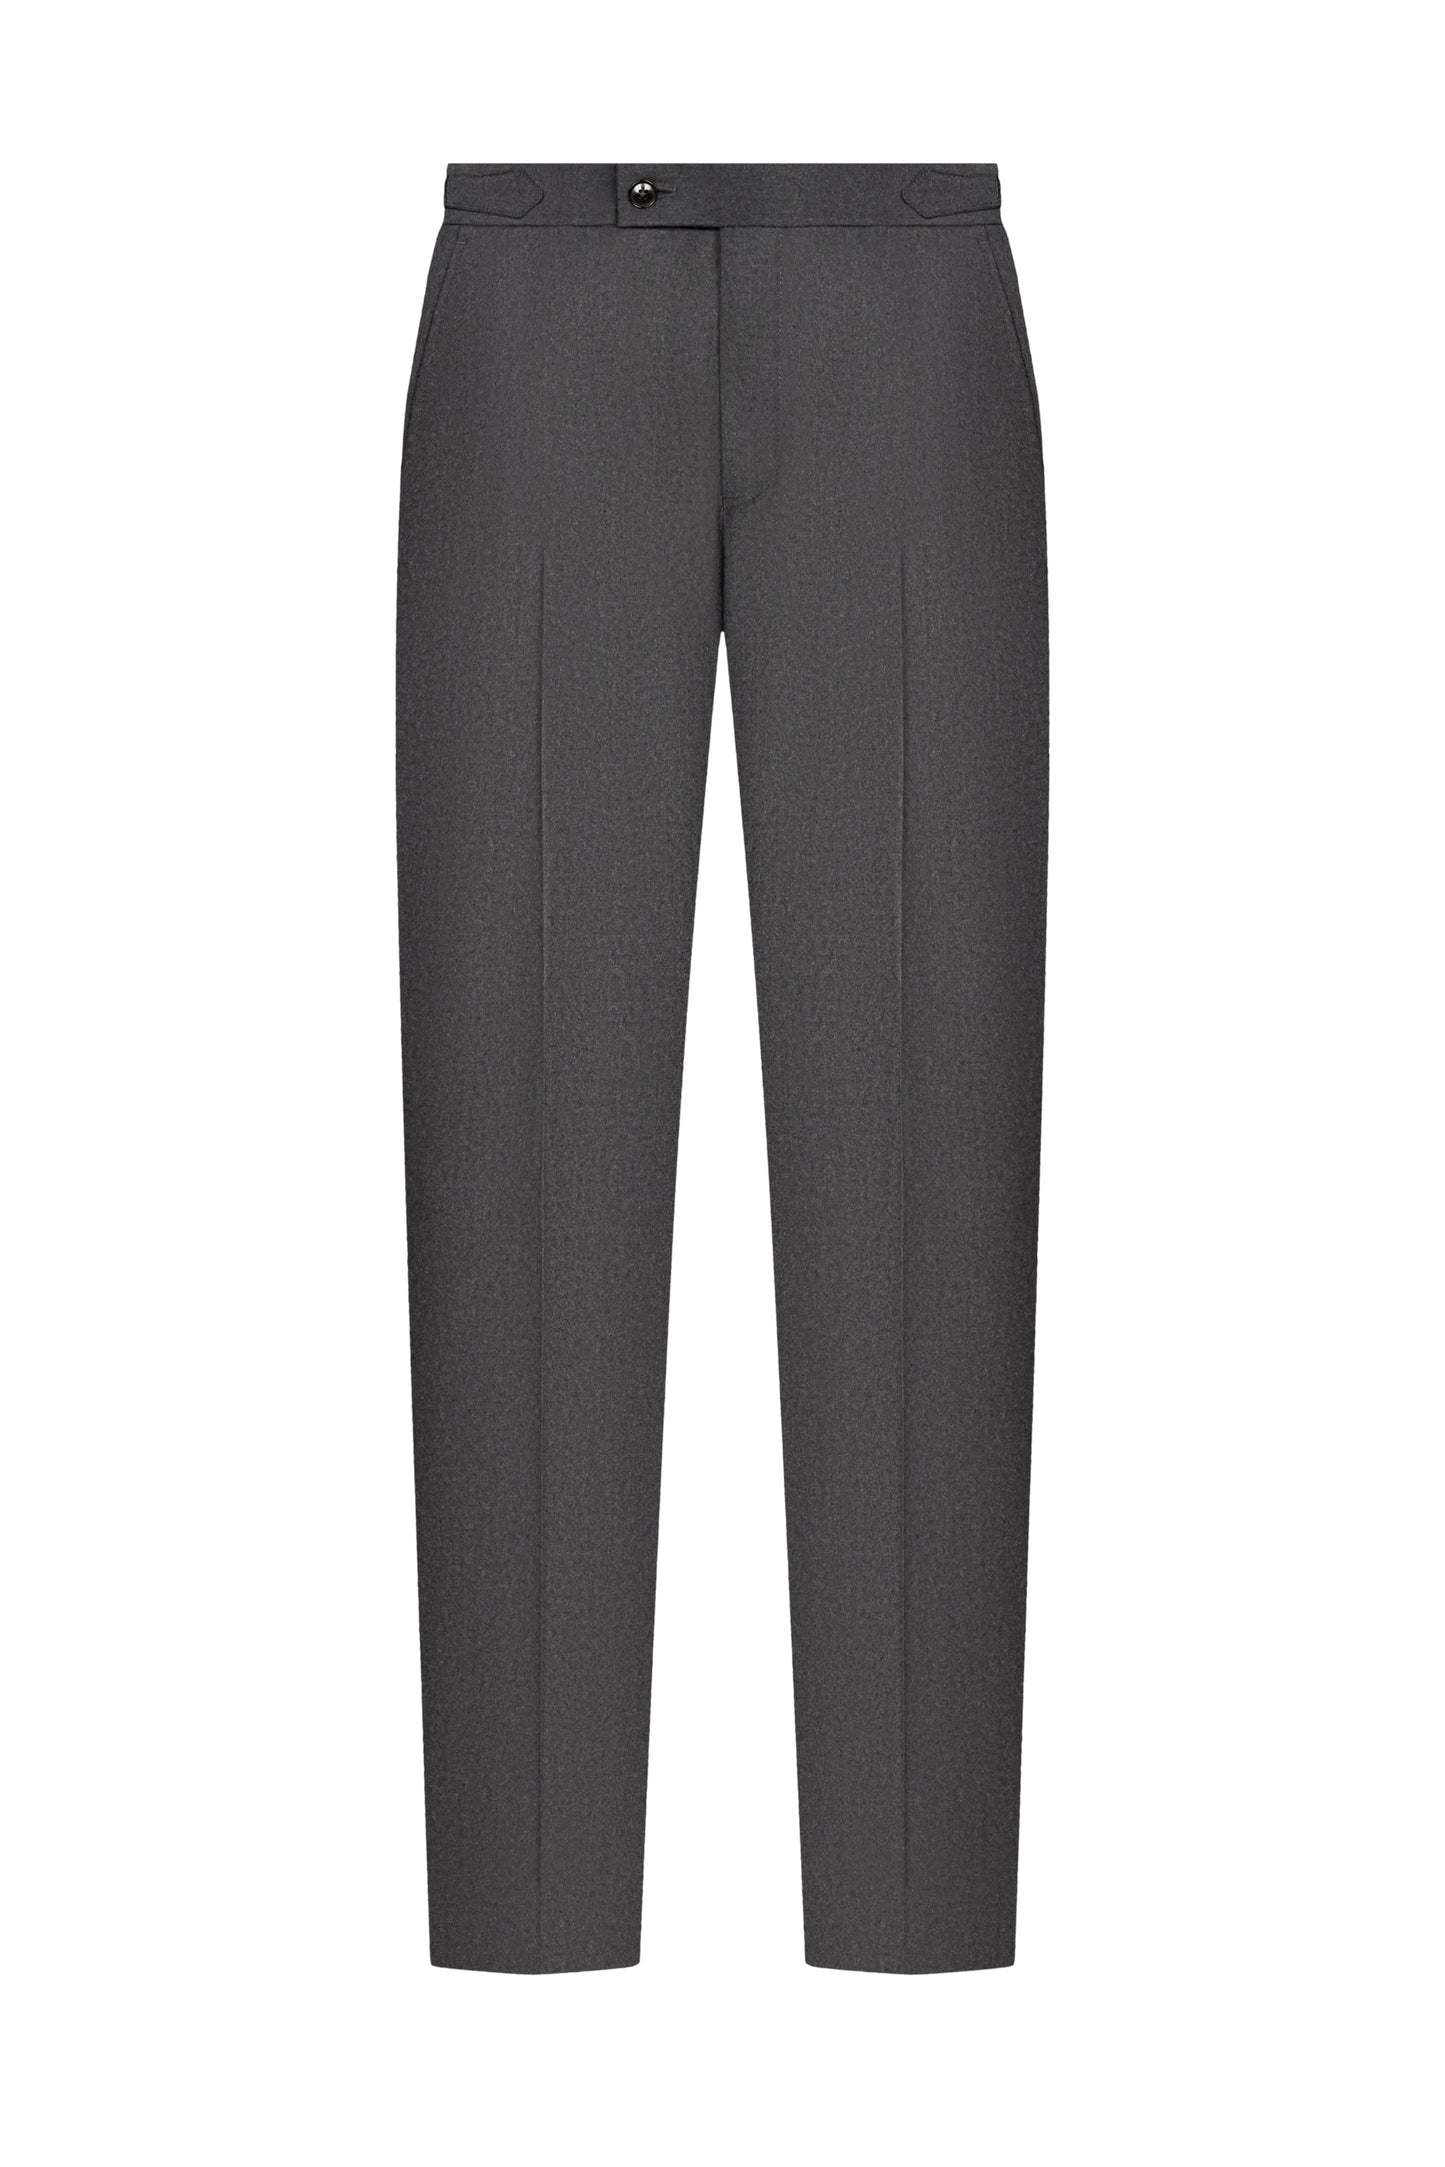 Charcoal Grey Flannel Trouser